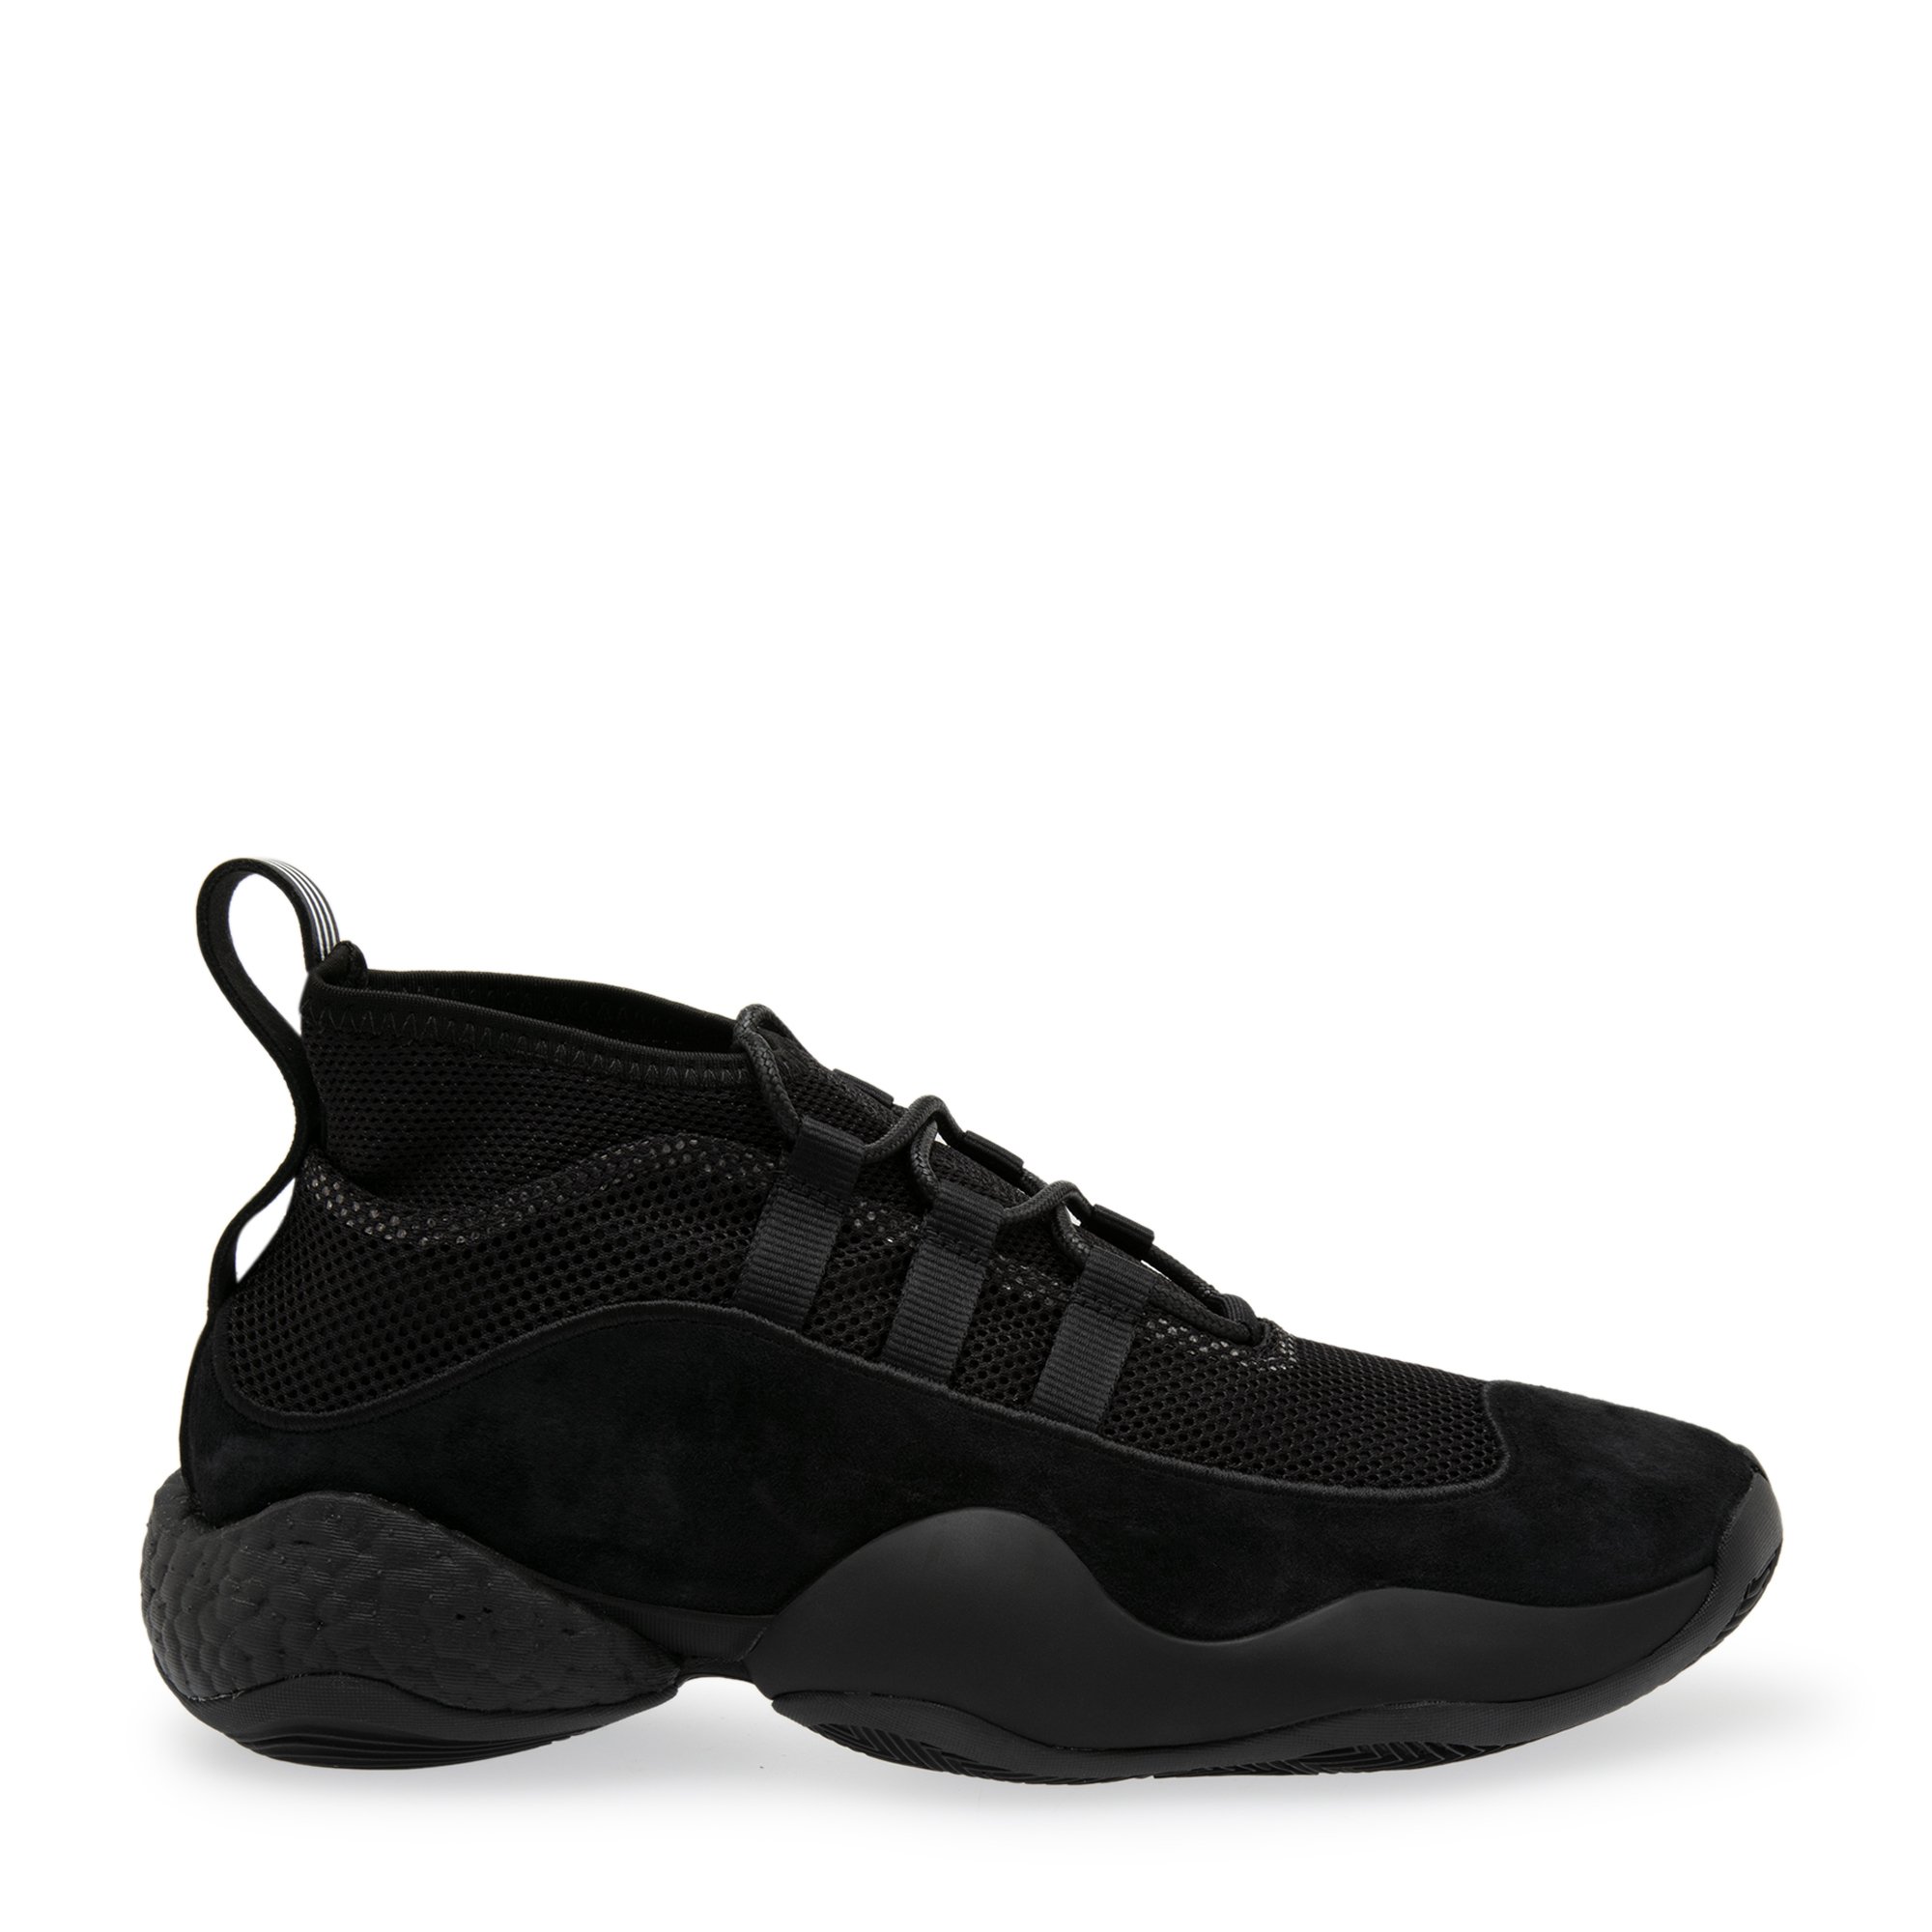 Crazy BYW sneakers